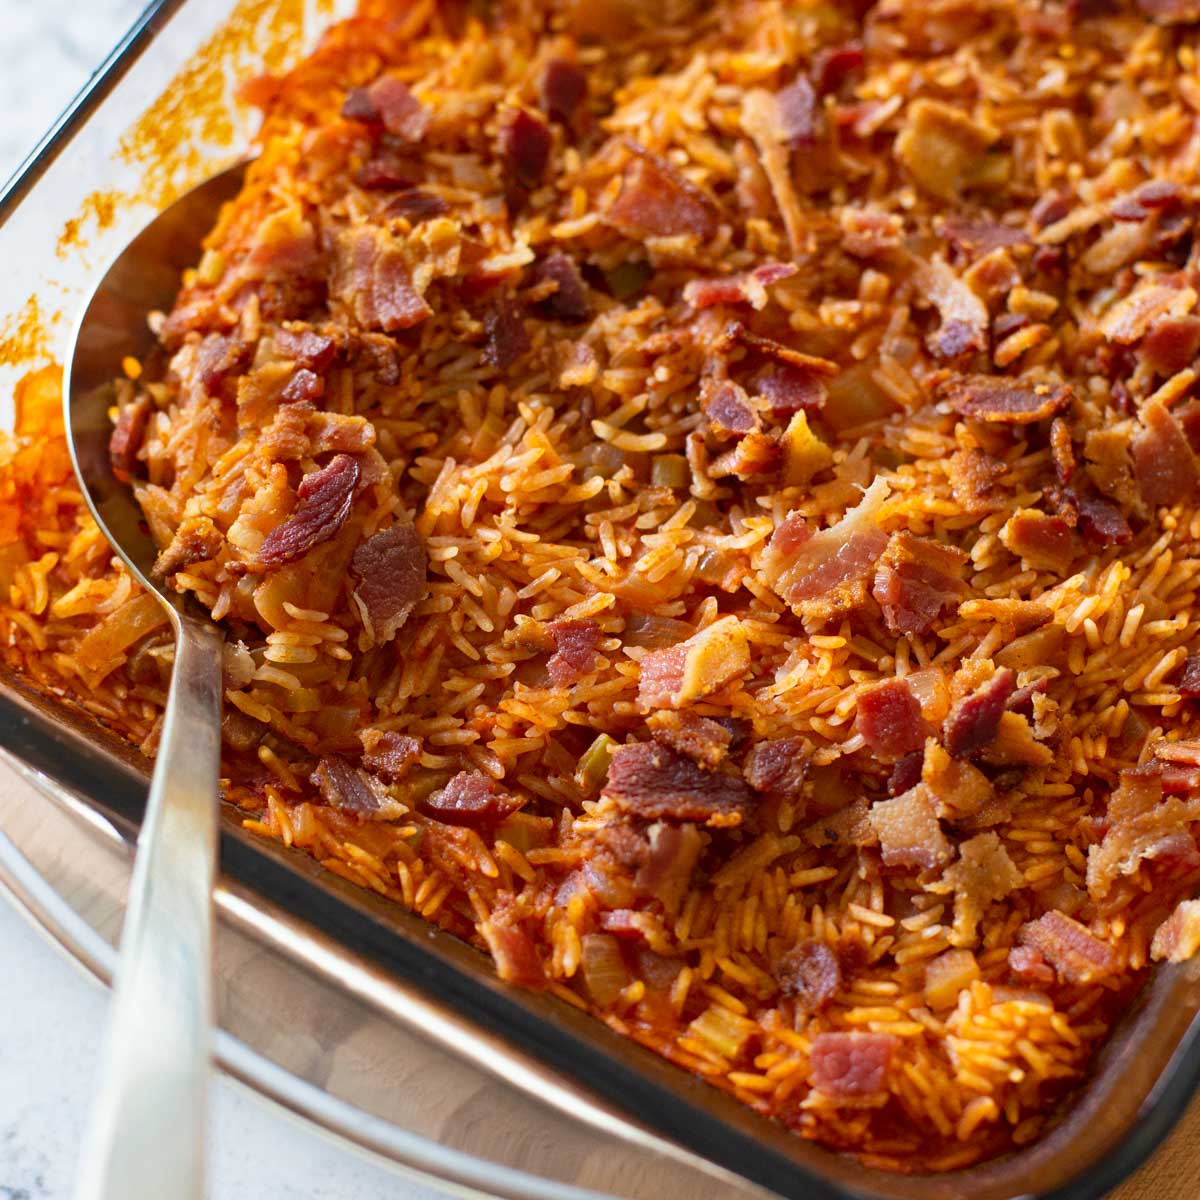 The finished baked rice dish with tomato and bacon has a spoon ready to serve.